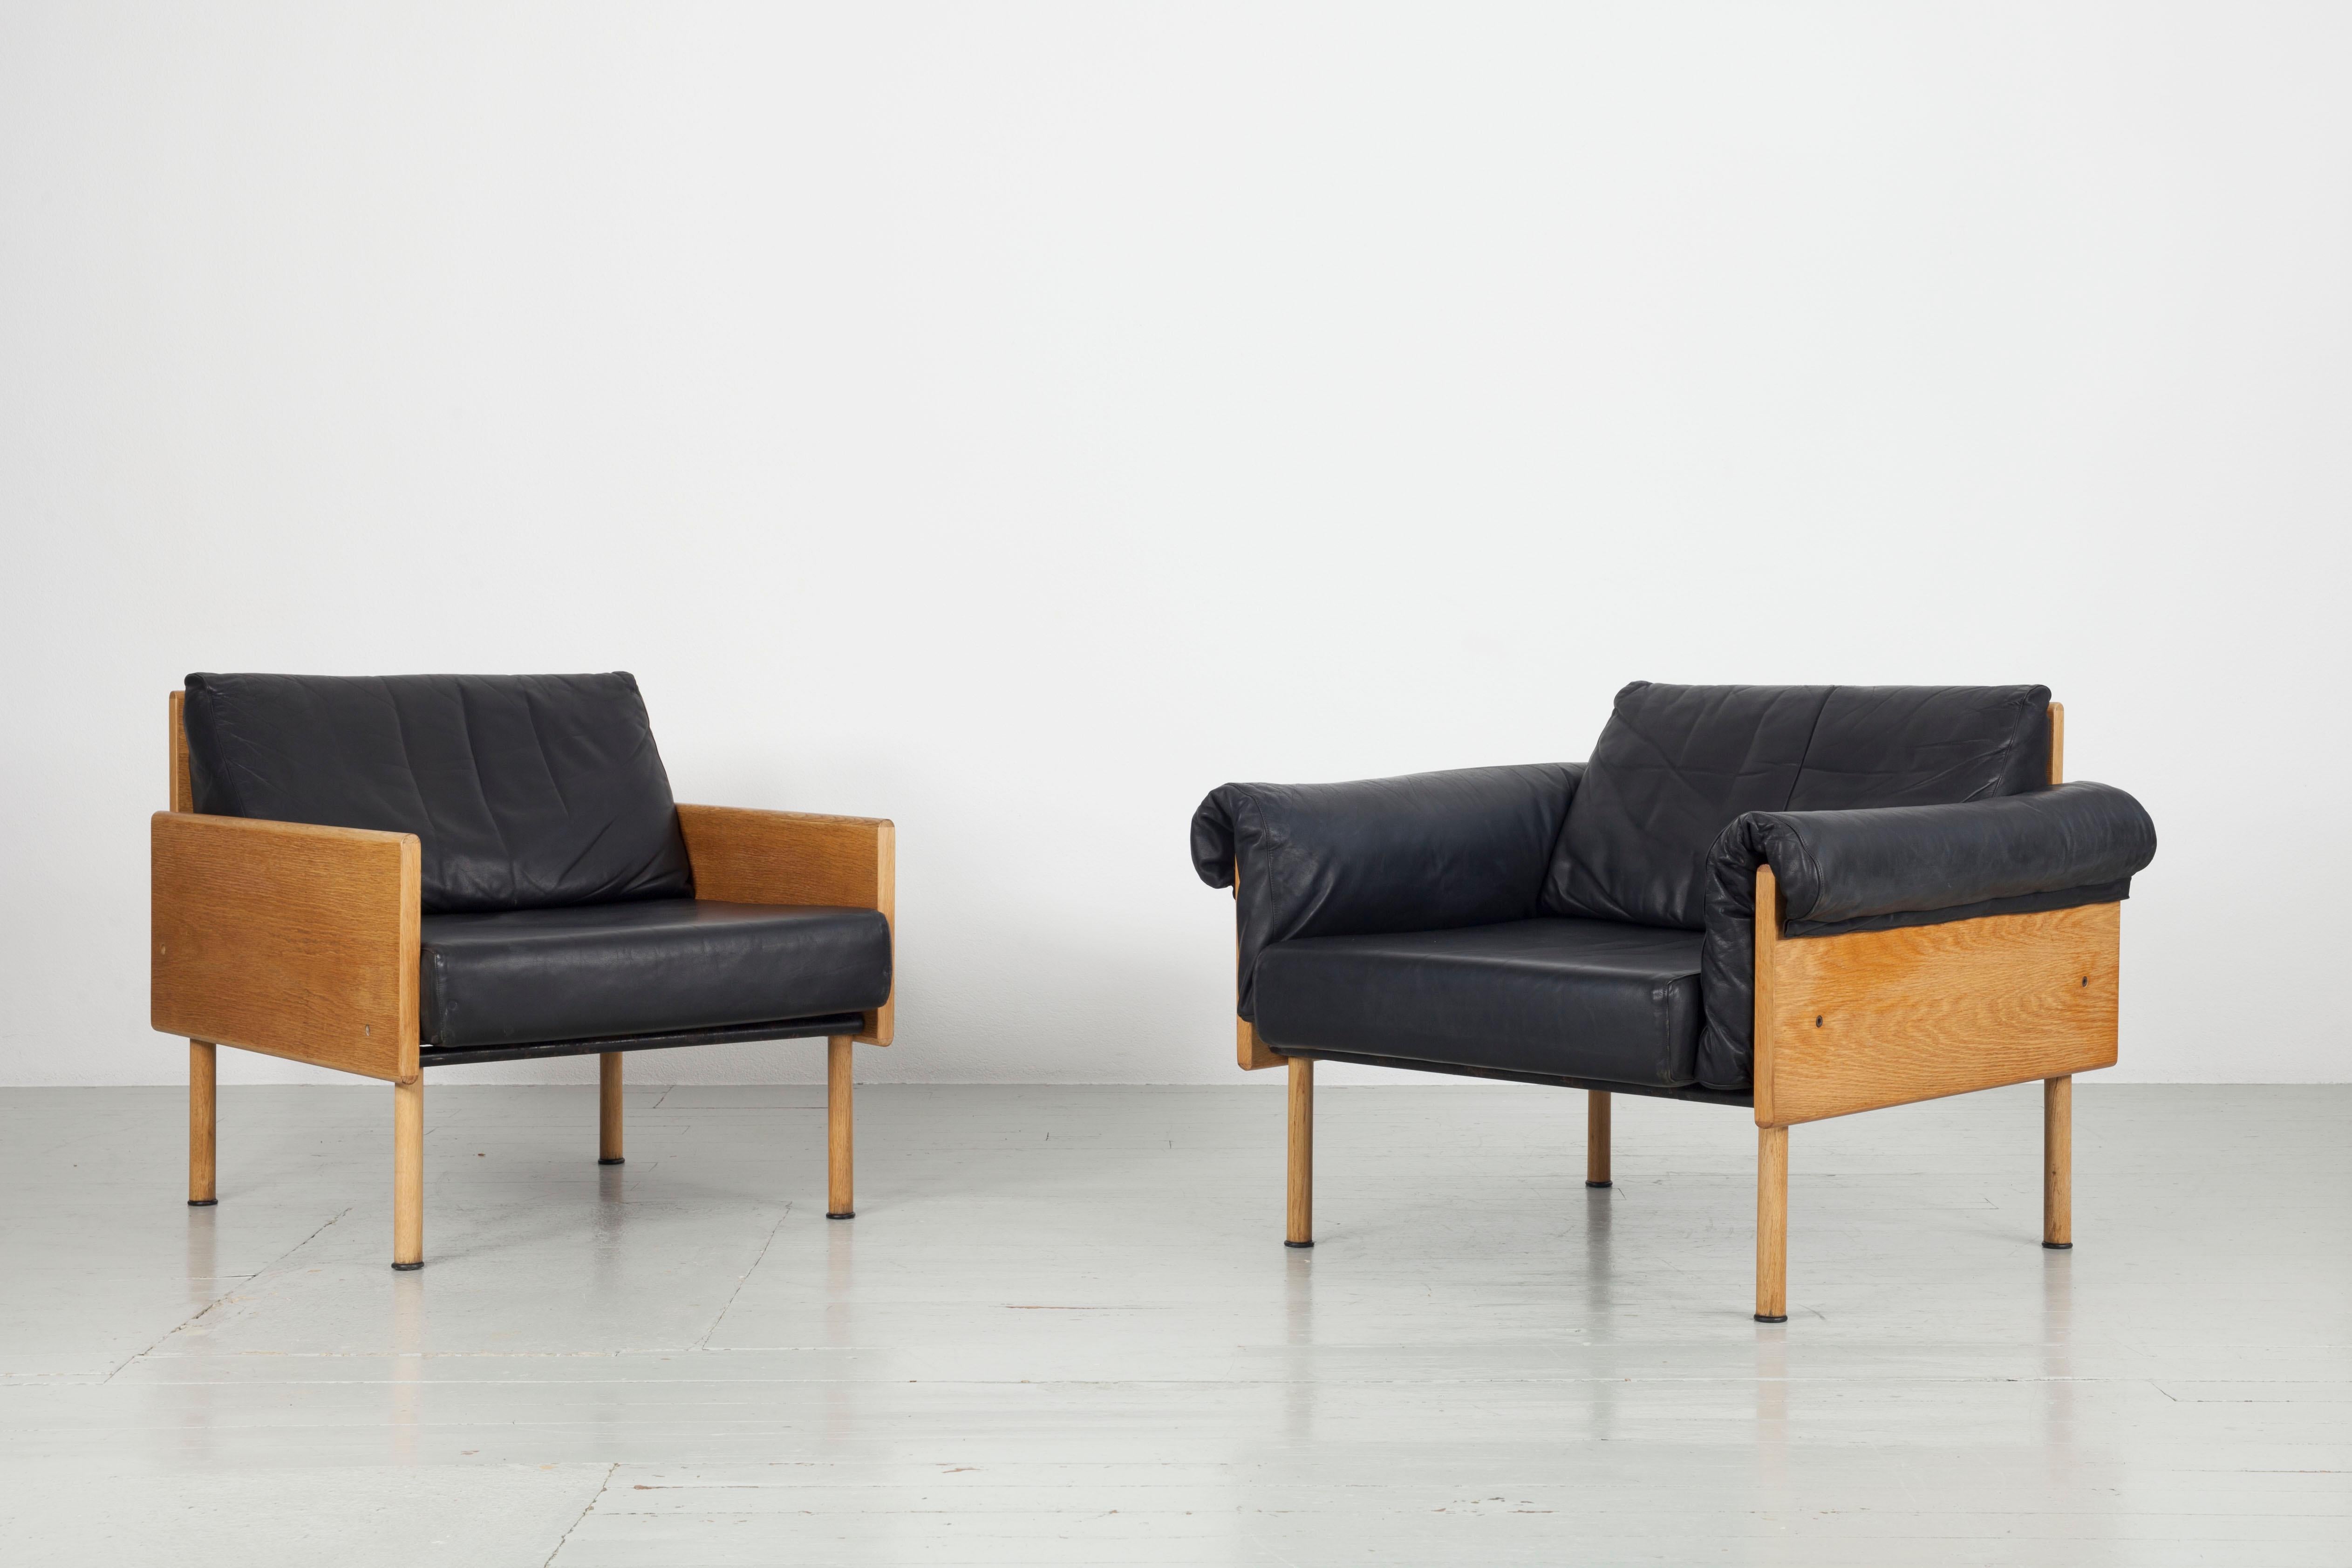 Set of 2 Sofas and 2 Chairs, by Yrjö Kukkapuro for Haimi Finland, 1963 For Sale 13